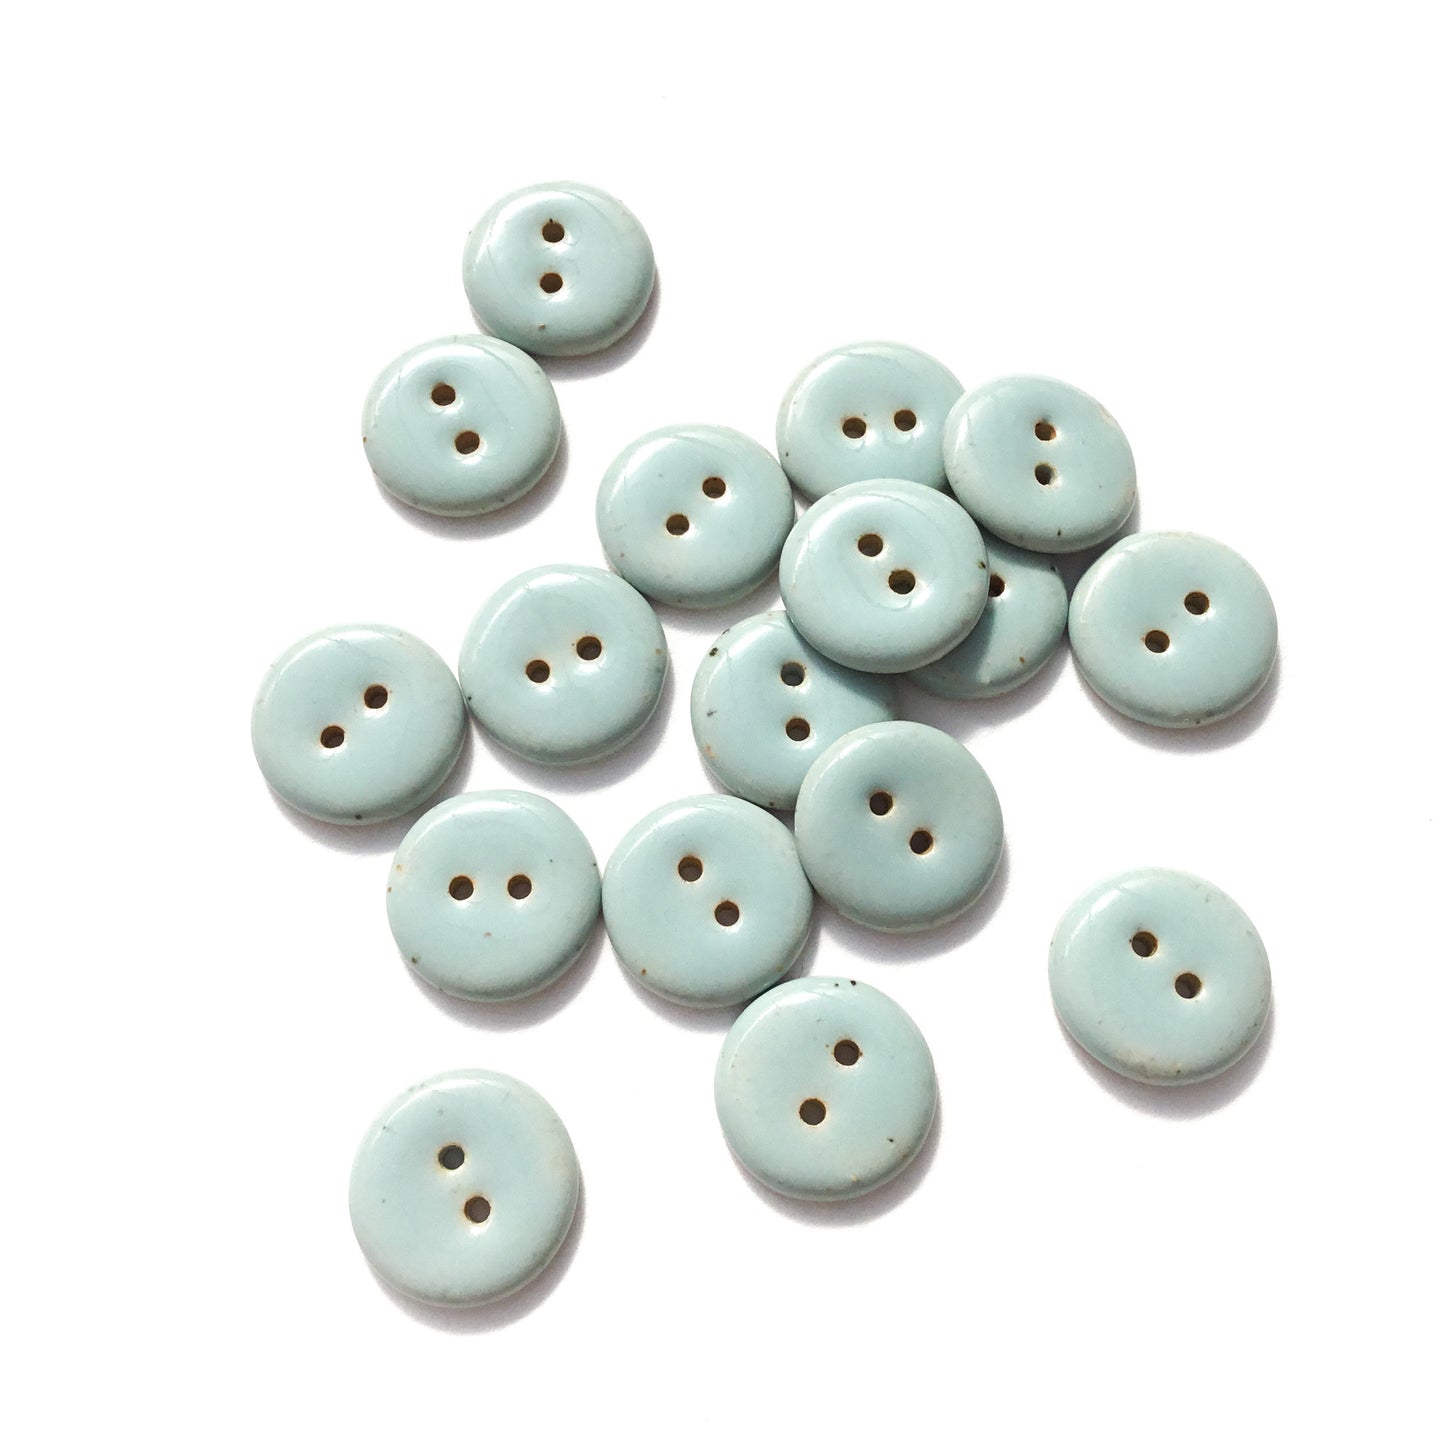 Gray-Blue Ceramic Stoneware Buttons  3/4"